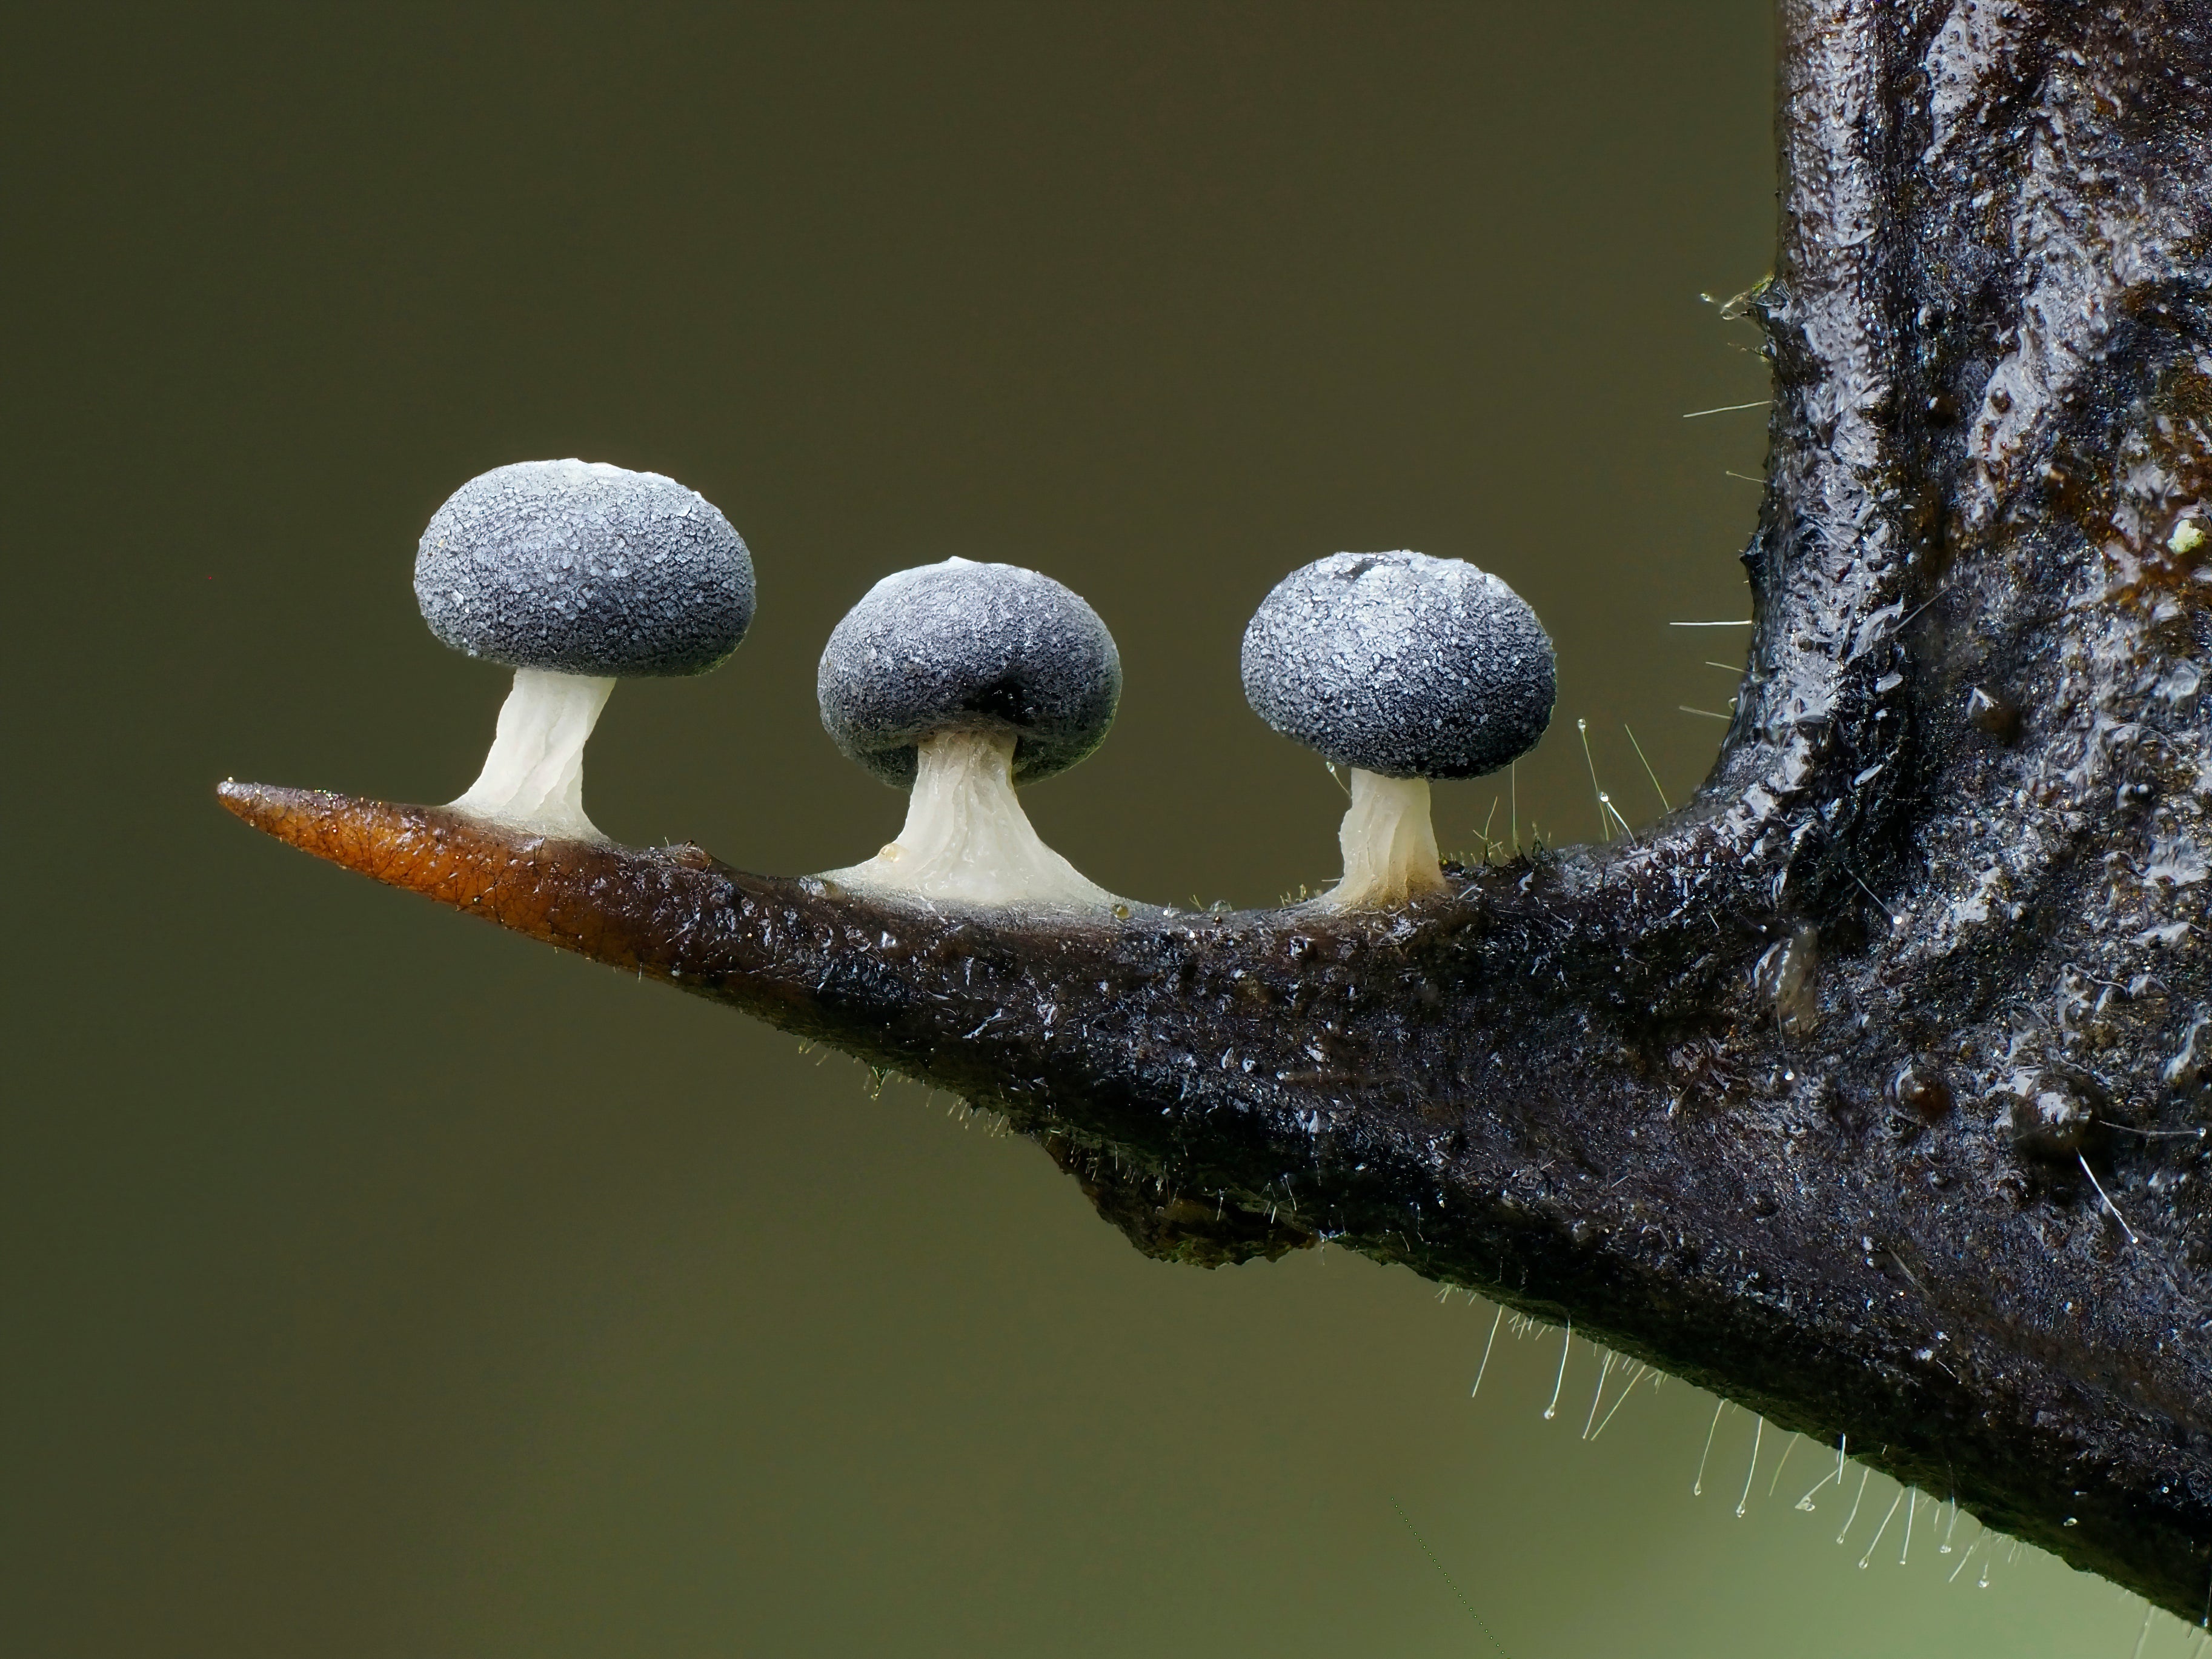 Three slime mounds on a holly leaf's spike. (Photo: Andy Sands)